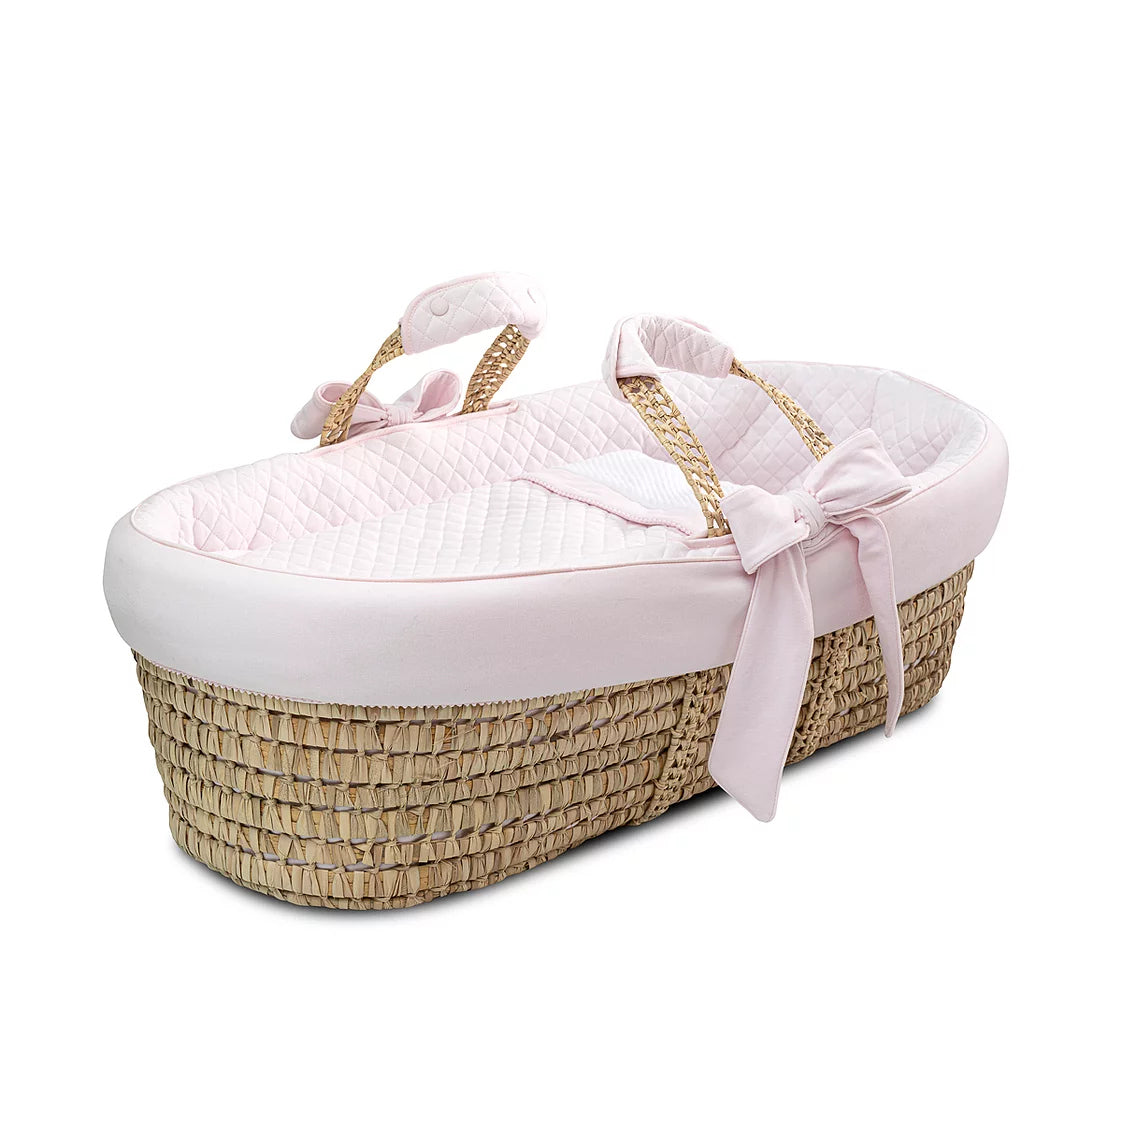 First New Pretty Pink Moses Basket